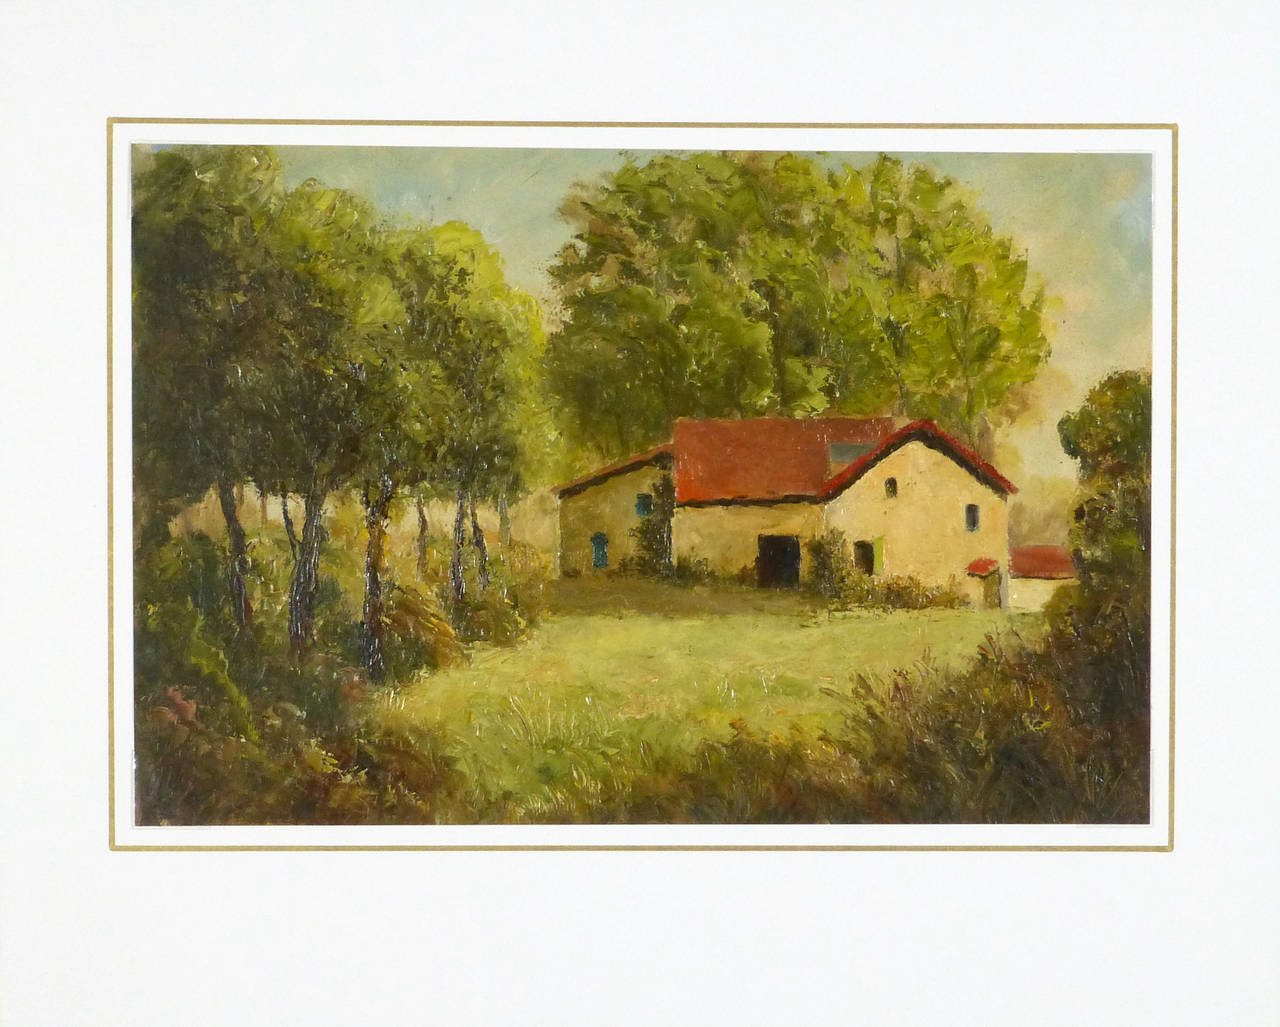 Excellent French oil painting of a country home in a clearing surrounded by lush, green vegetation by French artist Jean-Gil Sauldubois, circa 1940.

Original one-of-a-kind vintage work of art on paper displayed on a white mat with a gold border.